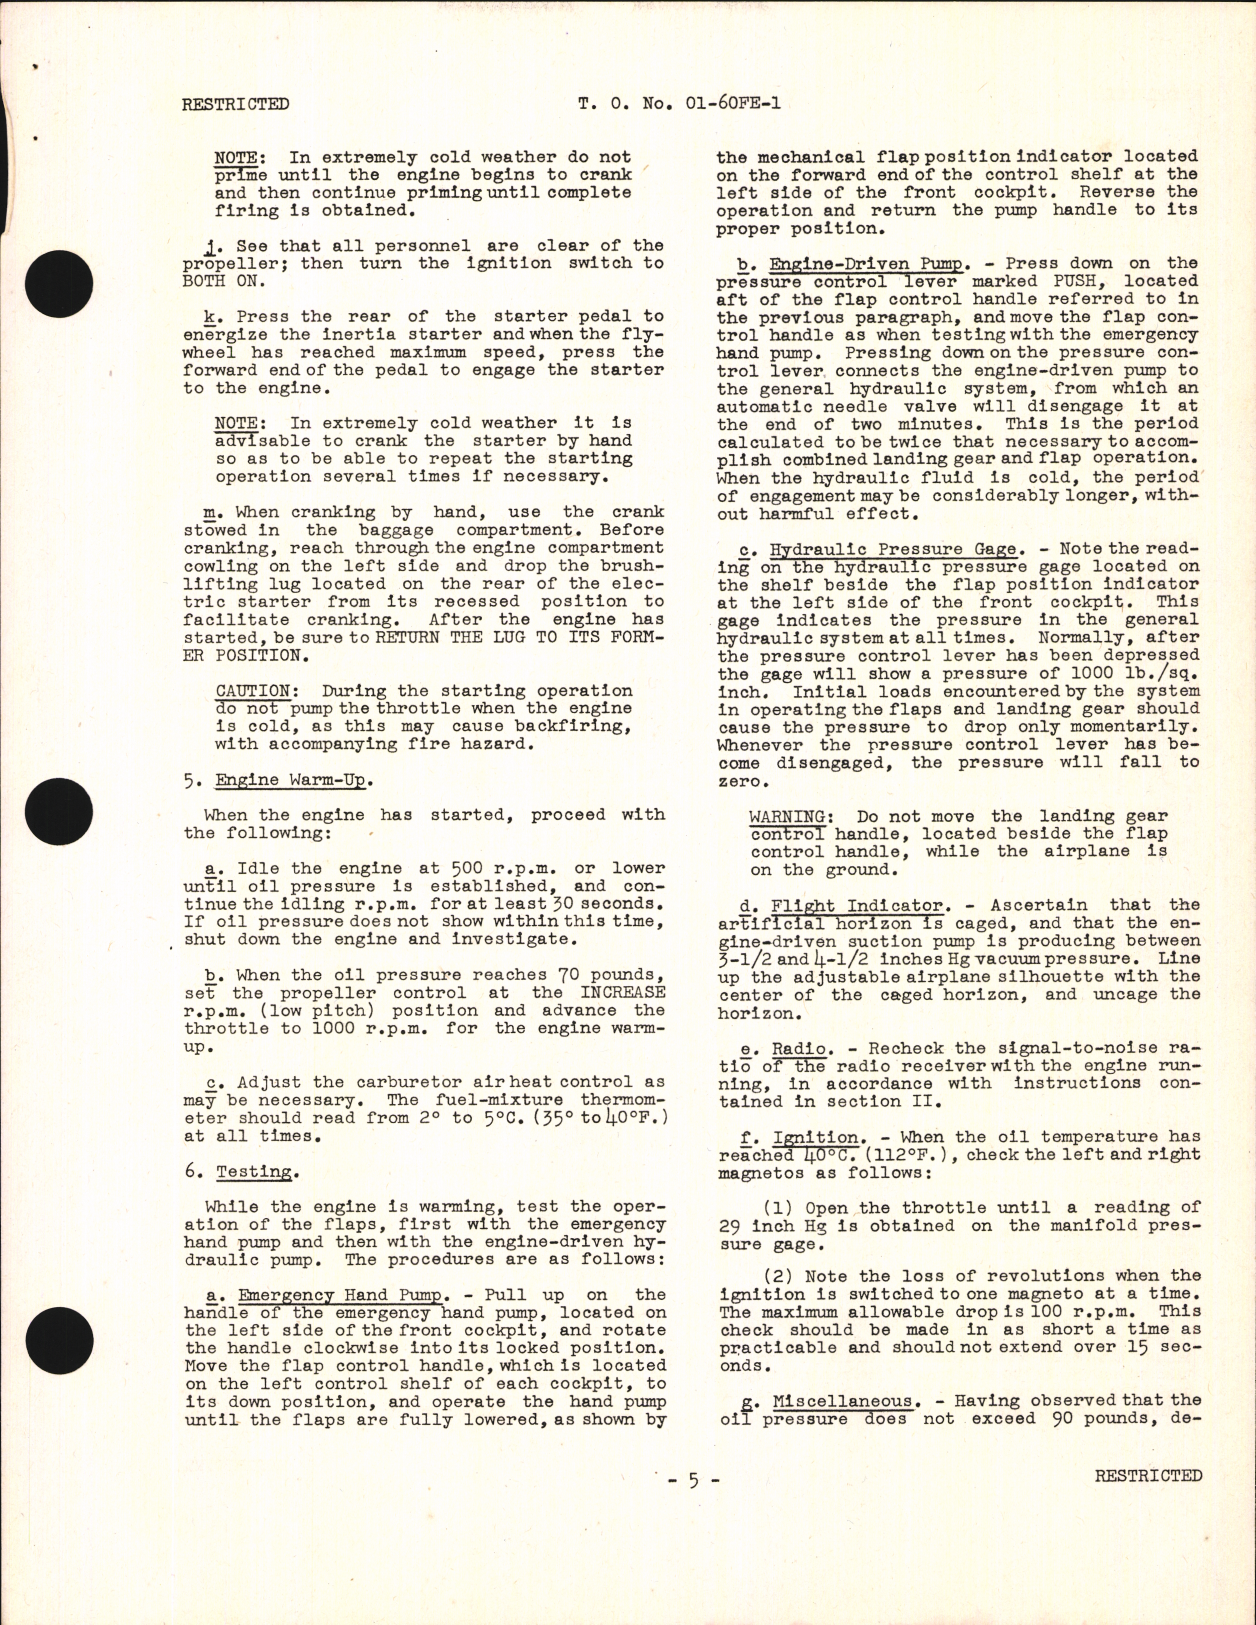 Sample page 7 from AirCorps Library document: Operation and Flight Instructions for AT-6C and SNJ-4 Training Airplanes